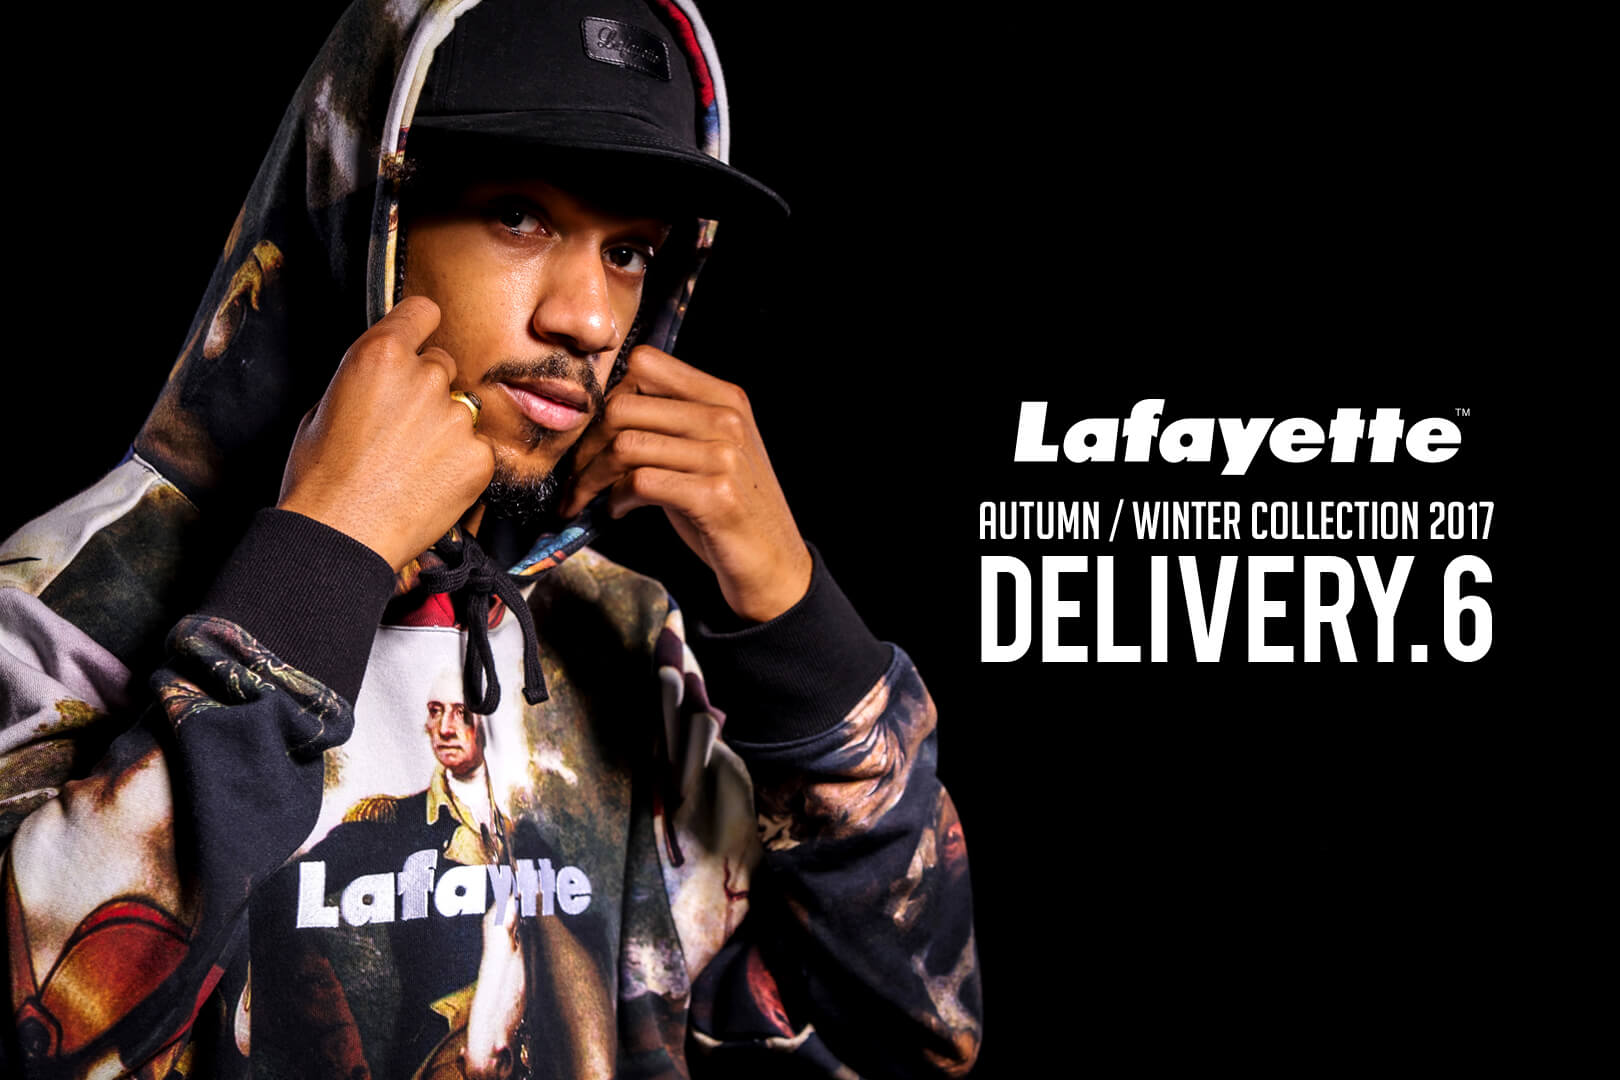 Lafayette 2017 AUTUMN/WINTER COLLECTION – DELIVERY.6